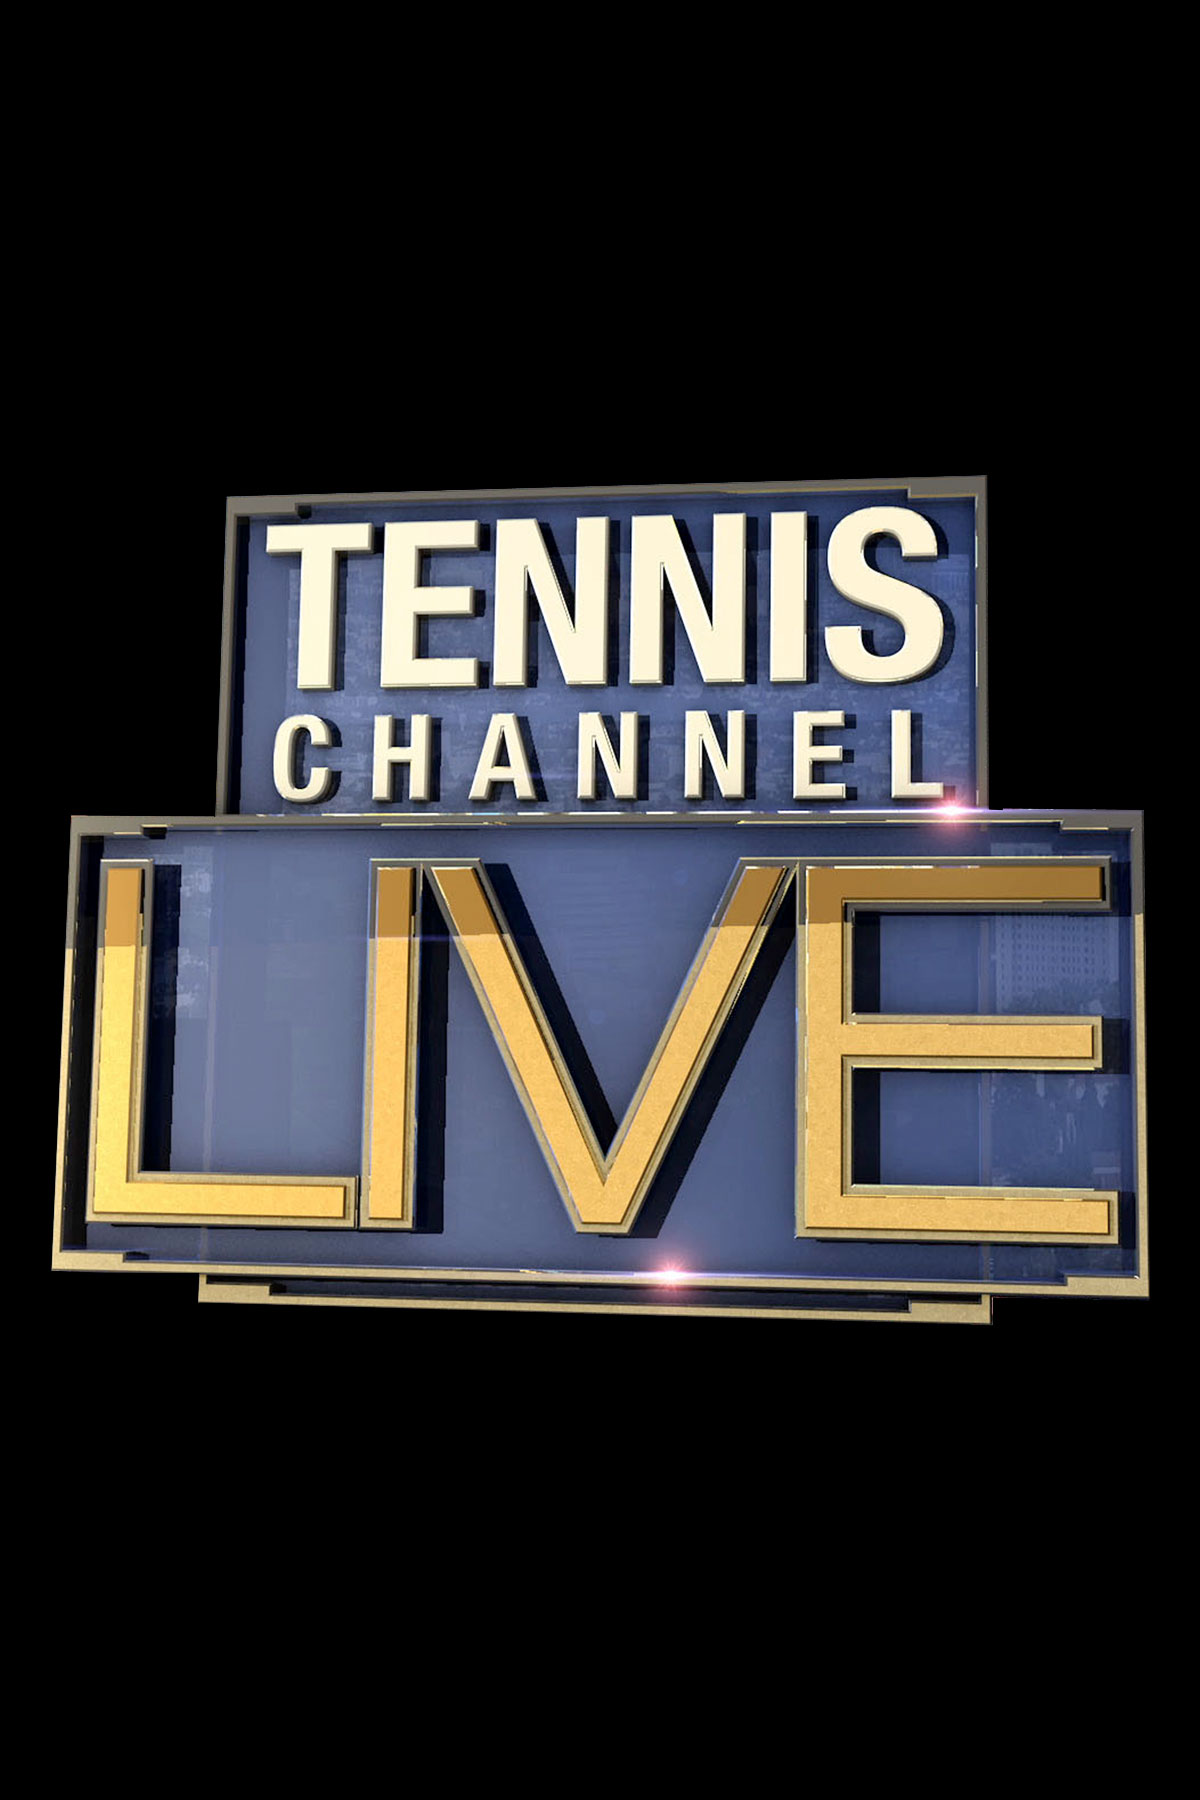 Tennis Channel Live - Where to Watch and Stream